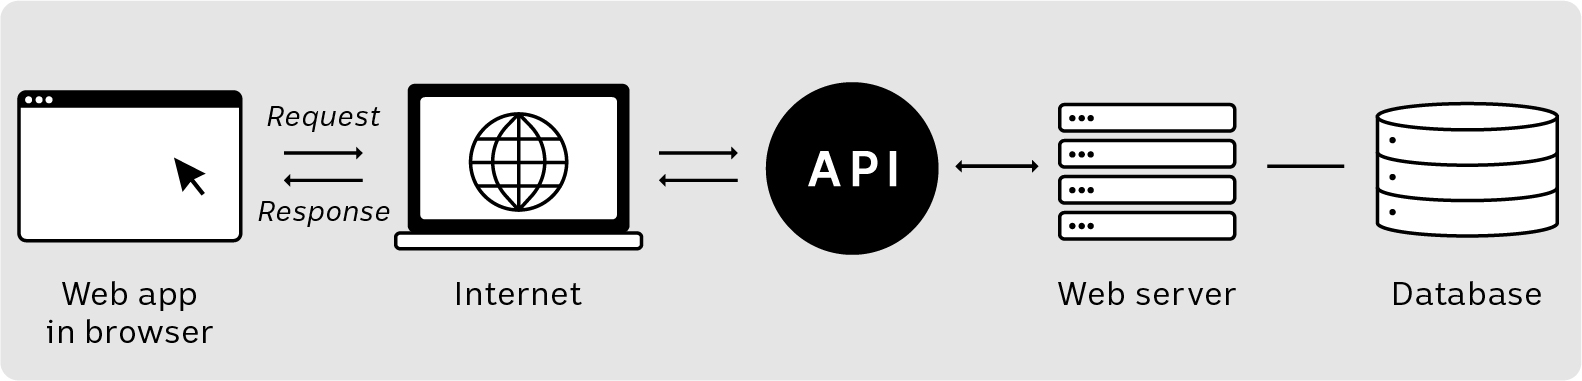 A graphics shows an API which sits between the internet and a web server, which are between a web browser and database.